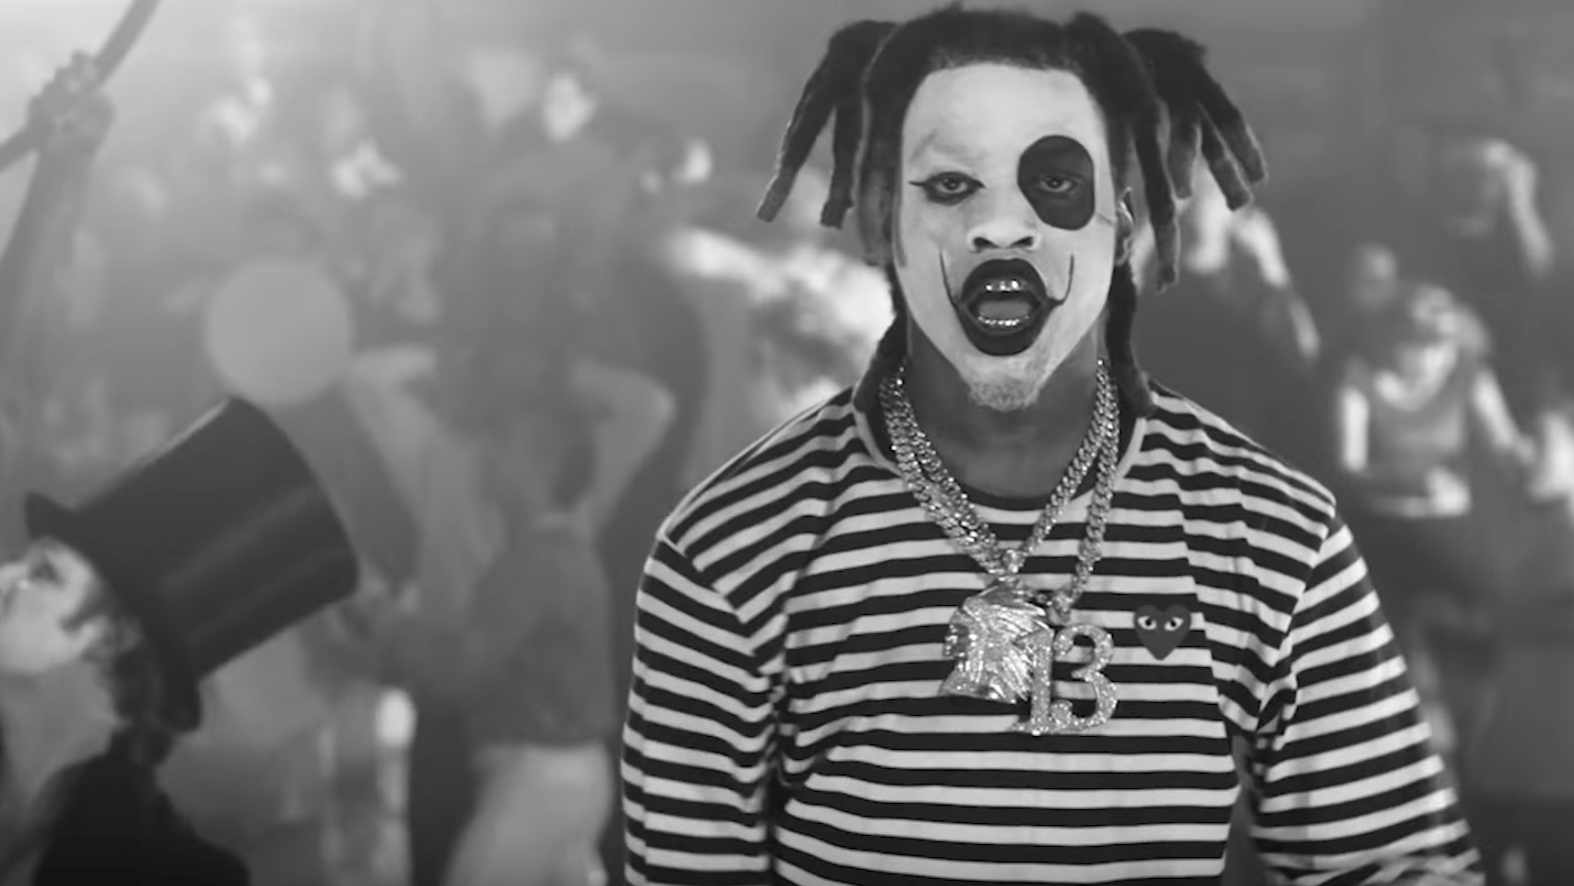 denzel curry clout cobain mp3 download